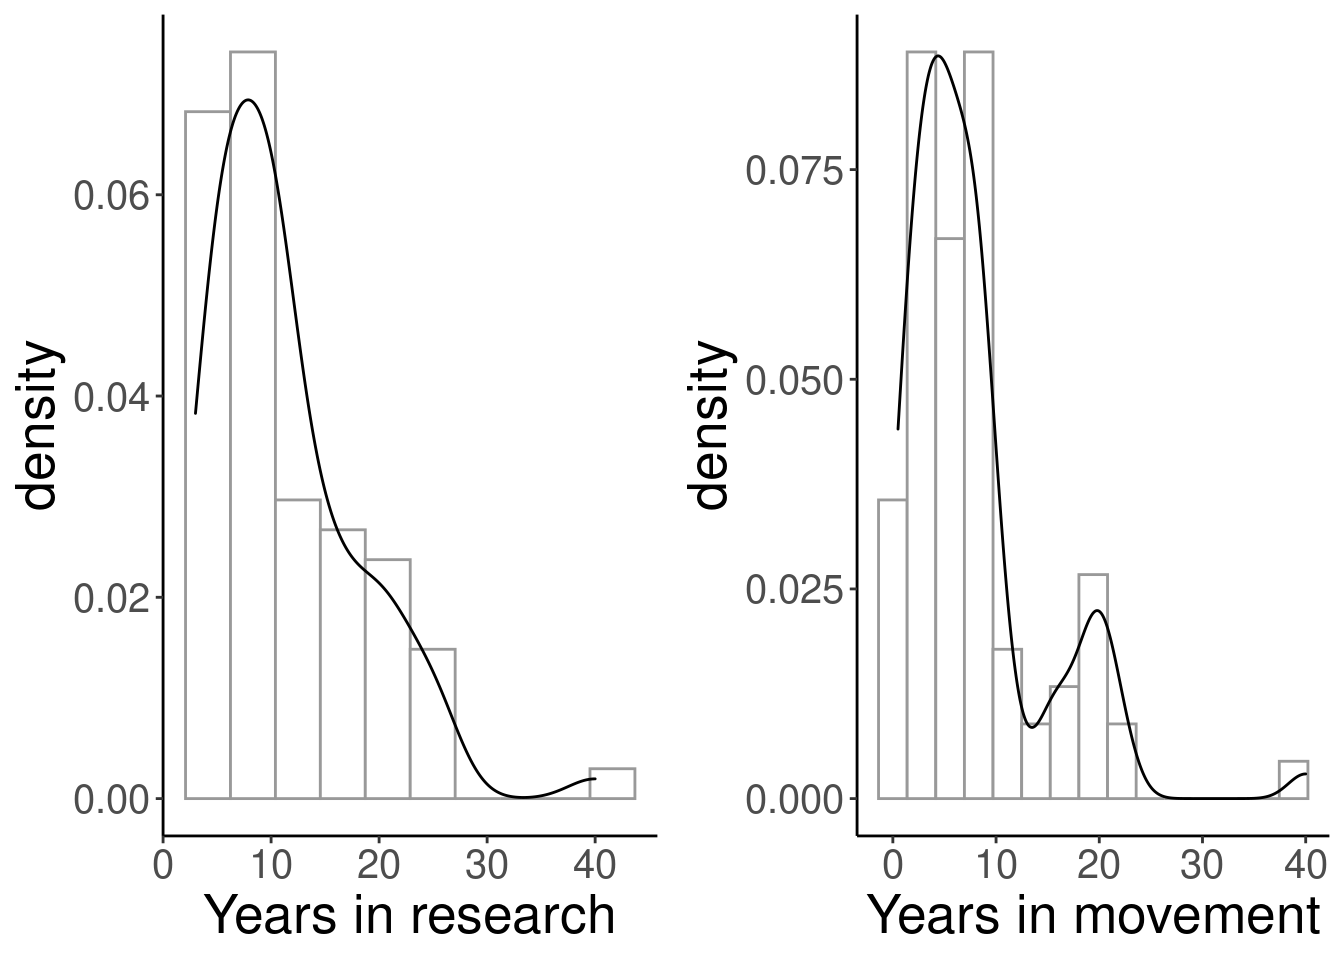 Histogram of the years in research of all participants (left), and histogram of the years working on movement (right). Both histograms are skewed to the right.